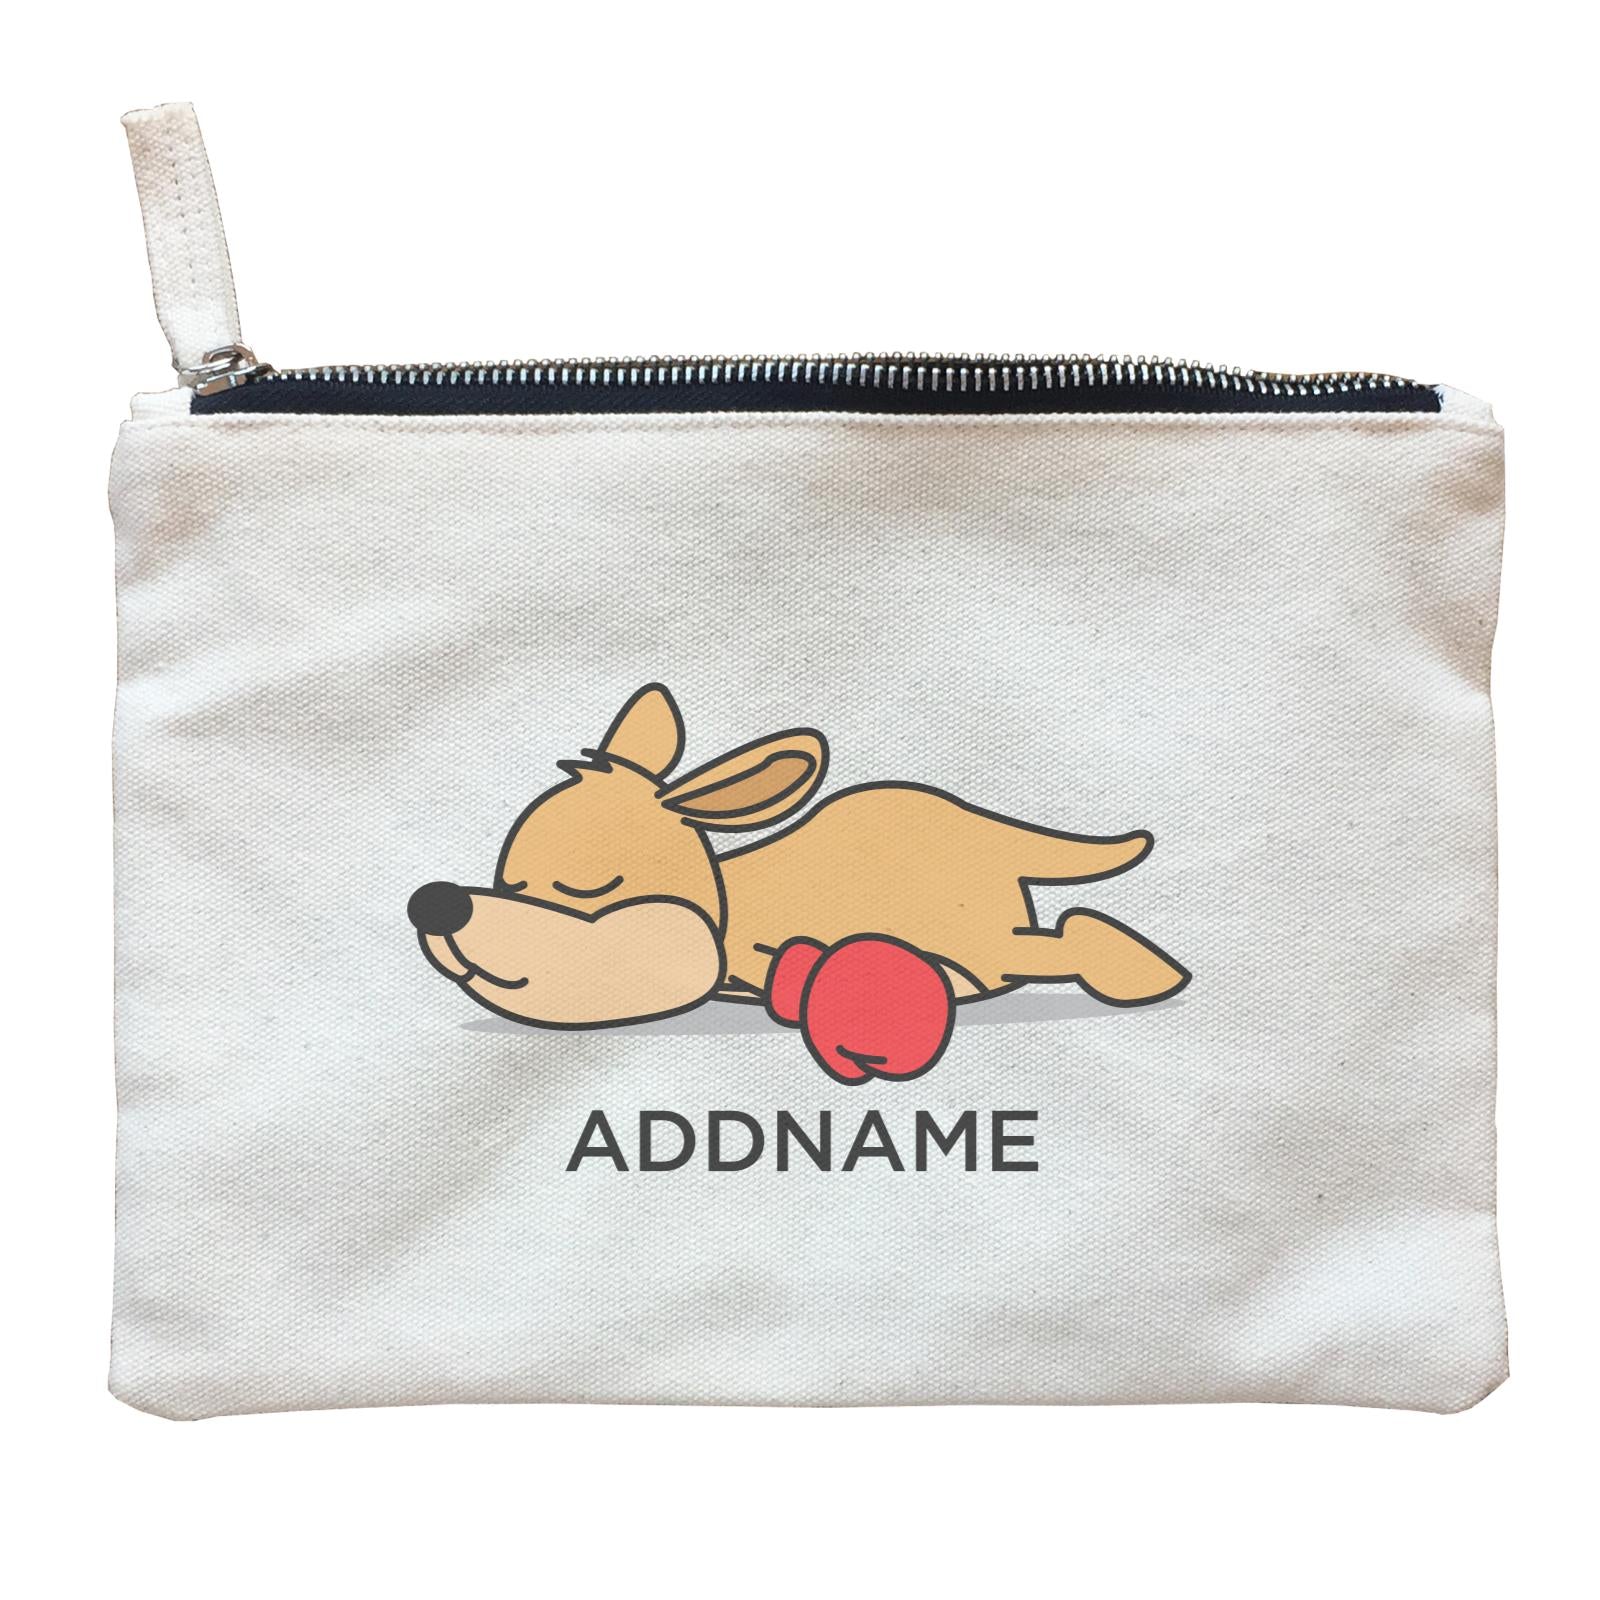 Lazy Kangaroo with Boxing Glove Addname Zipper Pouch